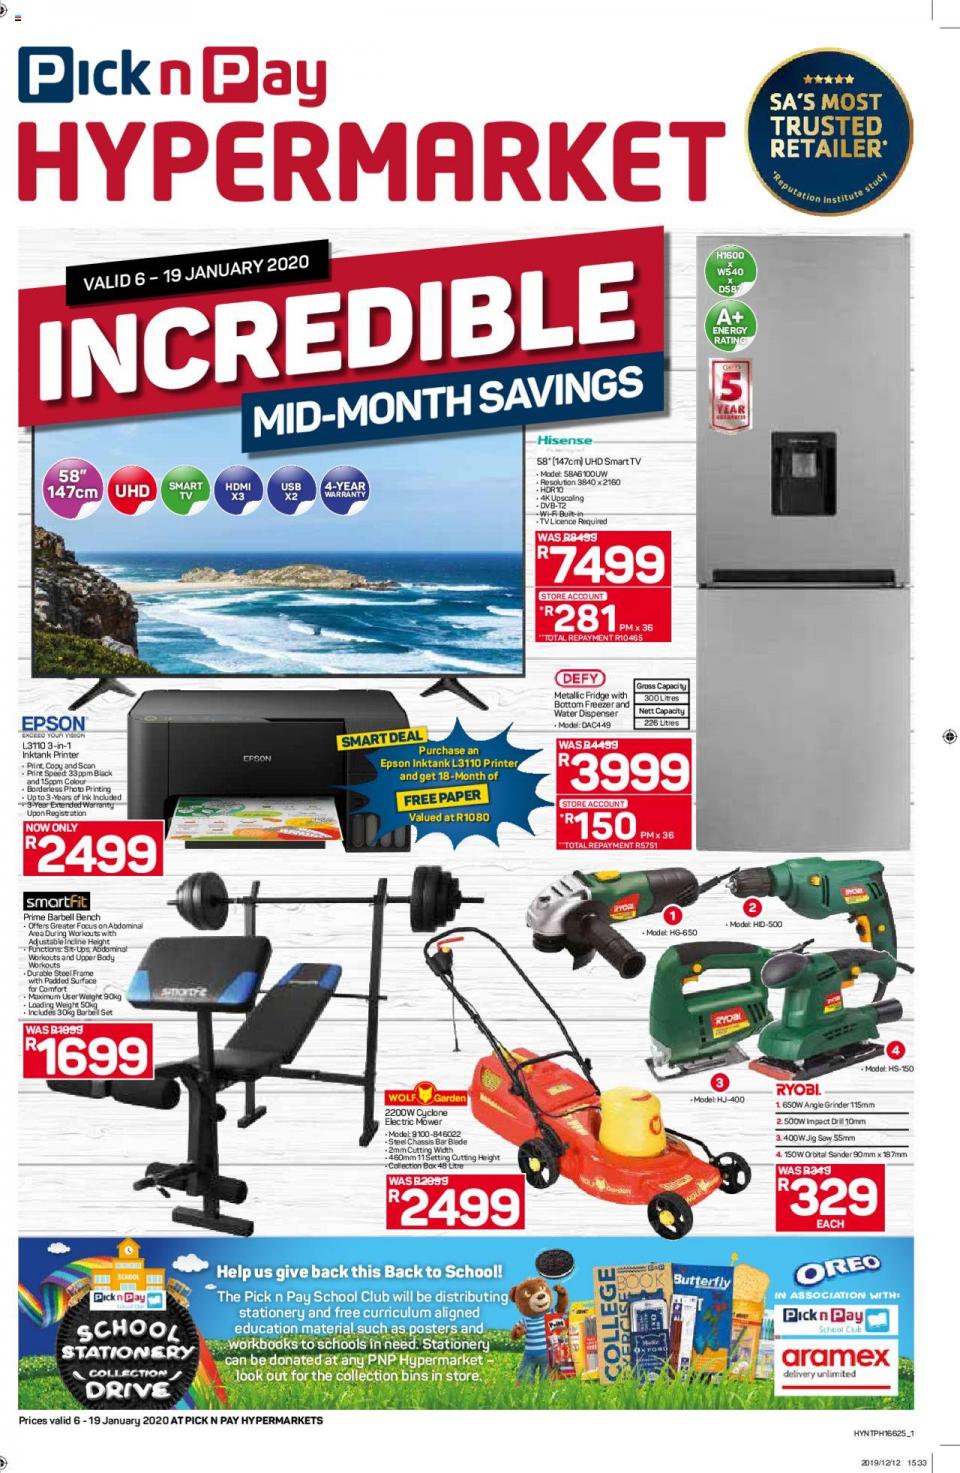 Pick n Pay Specials Mid-Month Savings HYPERMARKET 7 January 2020